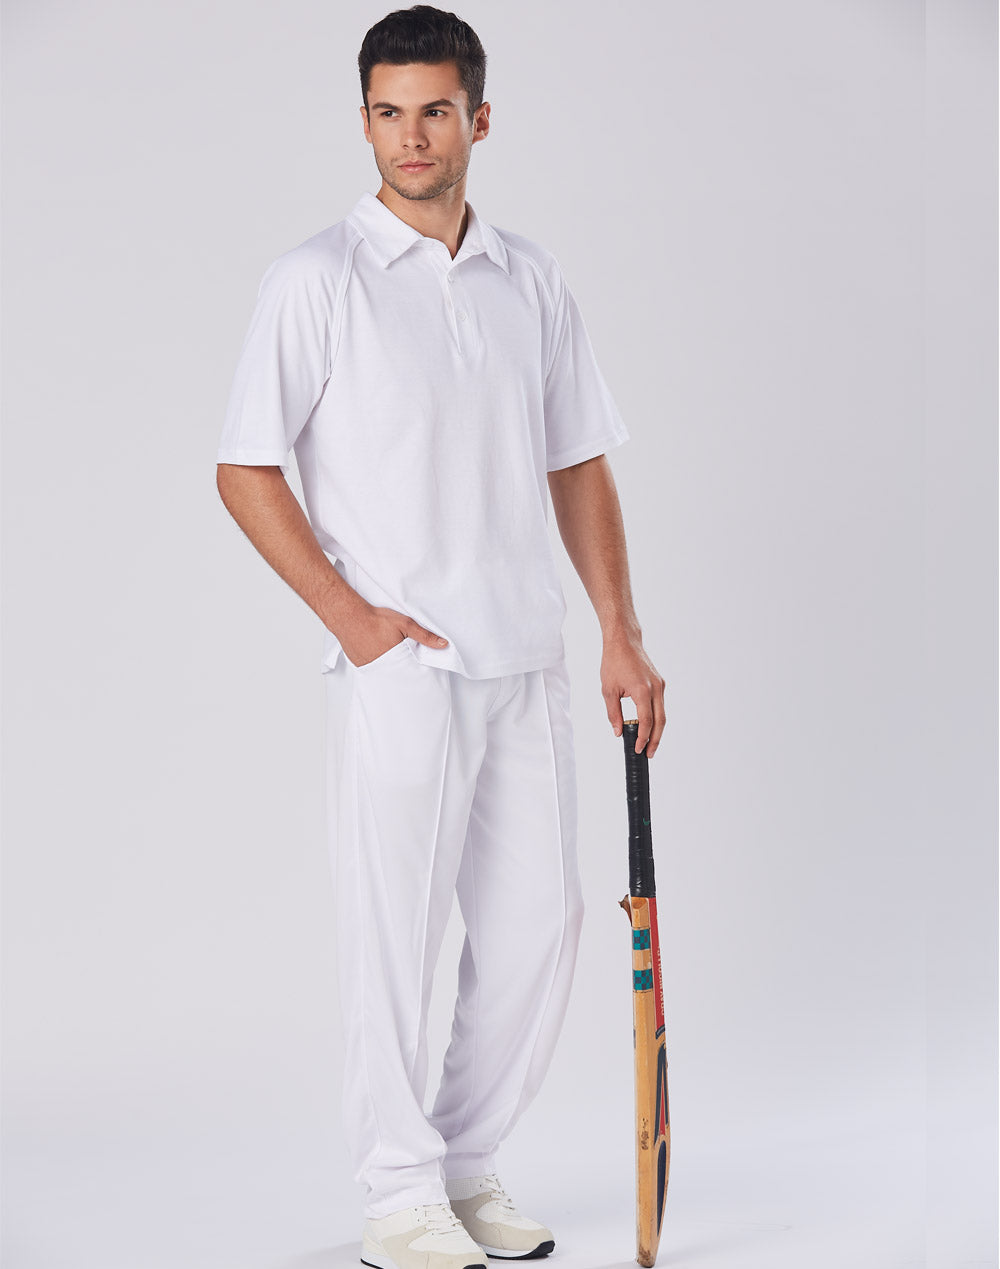 [PS29] Mens cooldry cricket polo